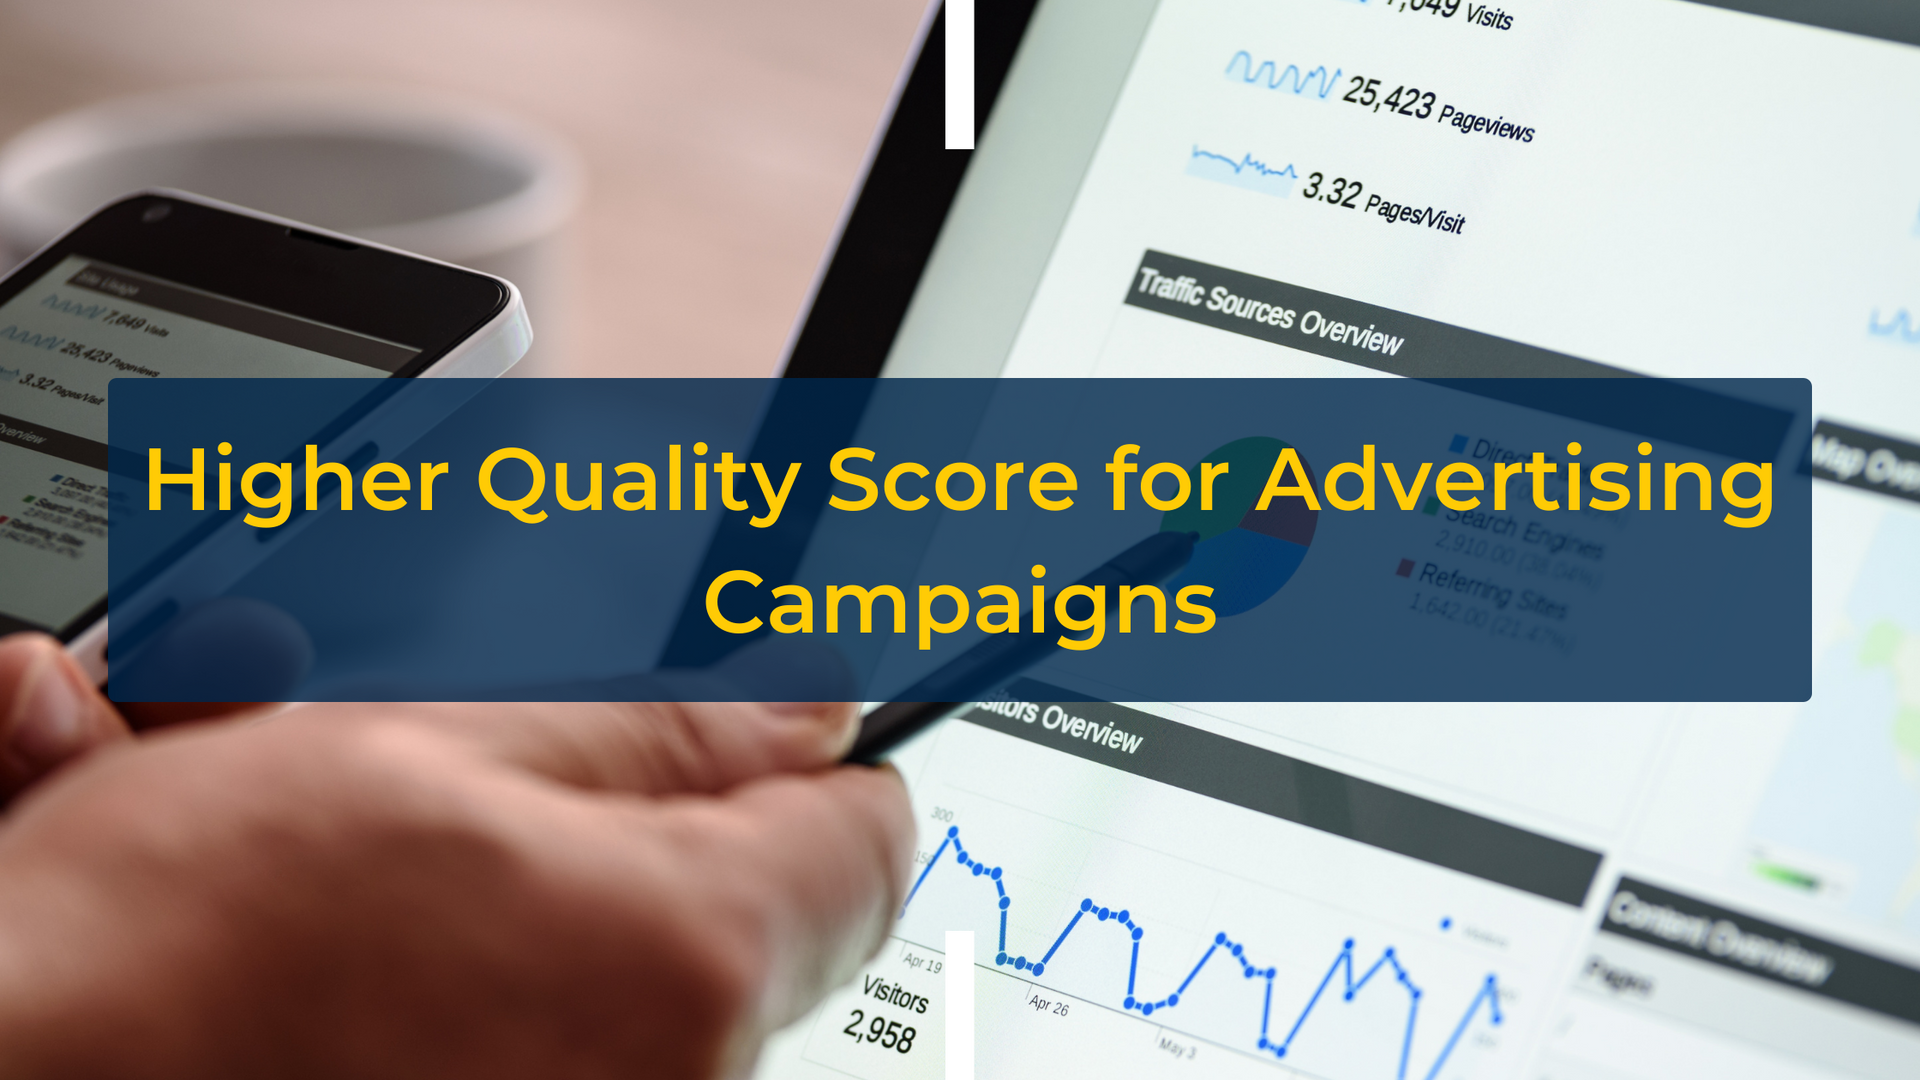 Higher Quality Score for Advertising Campaigns